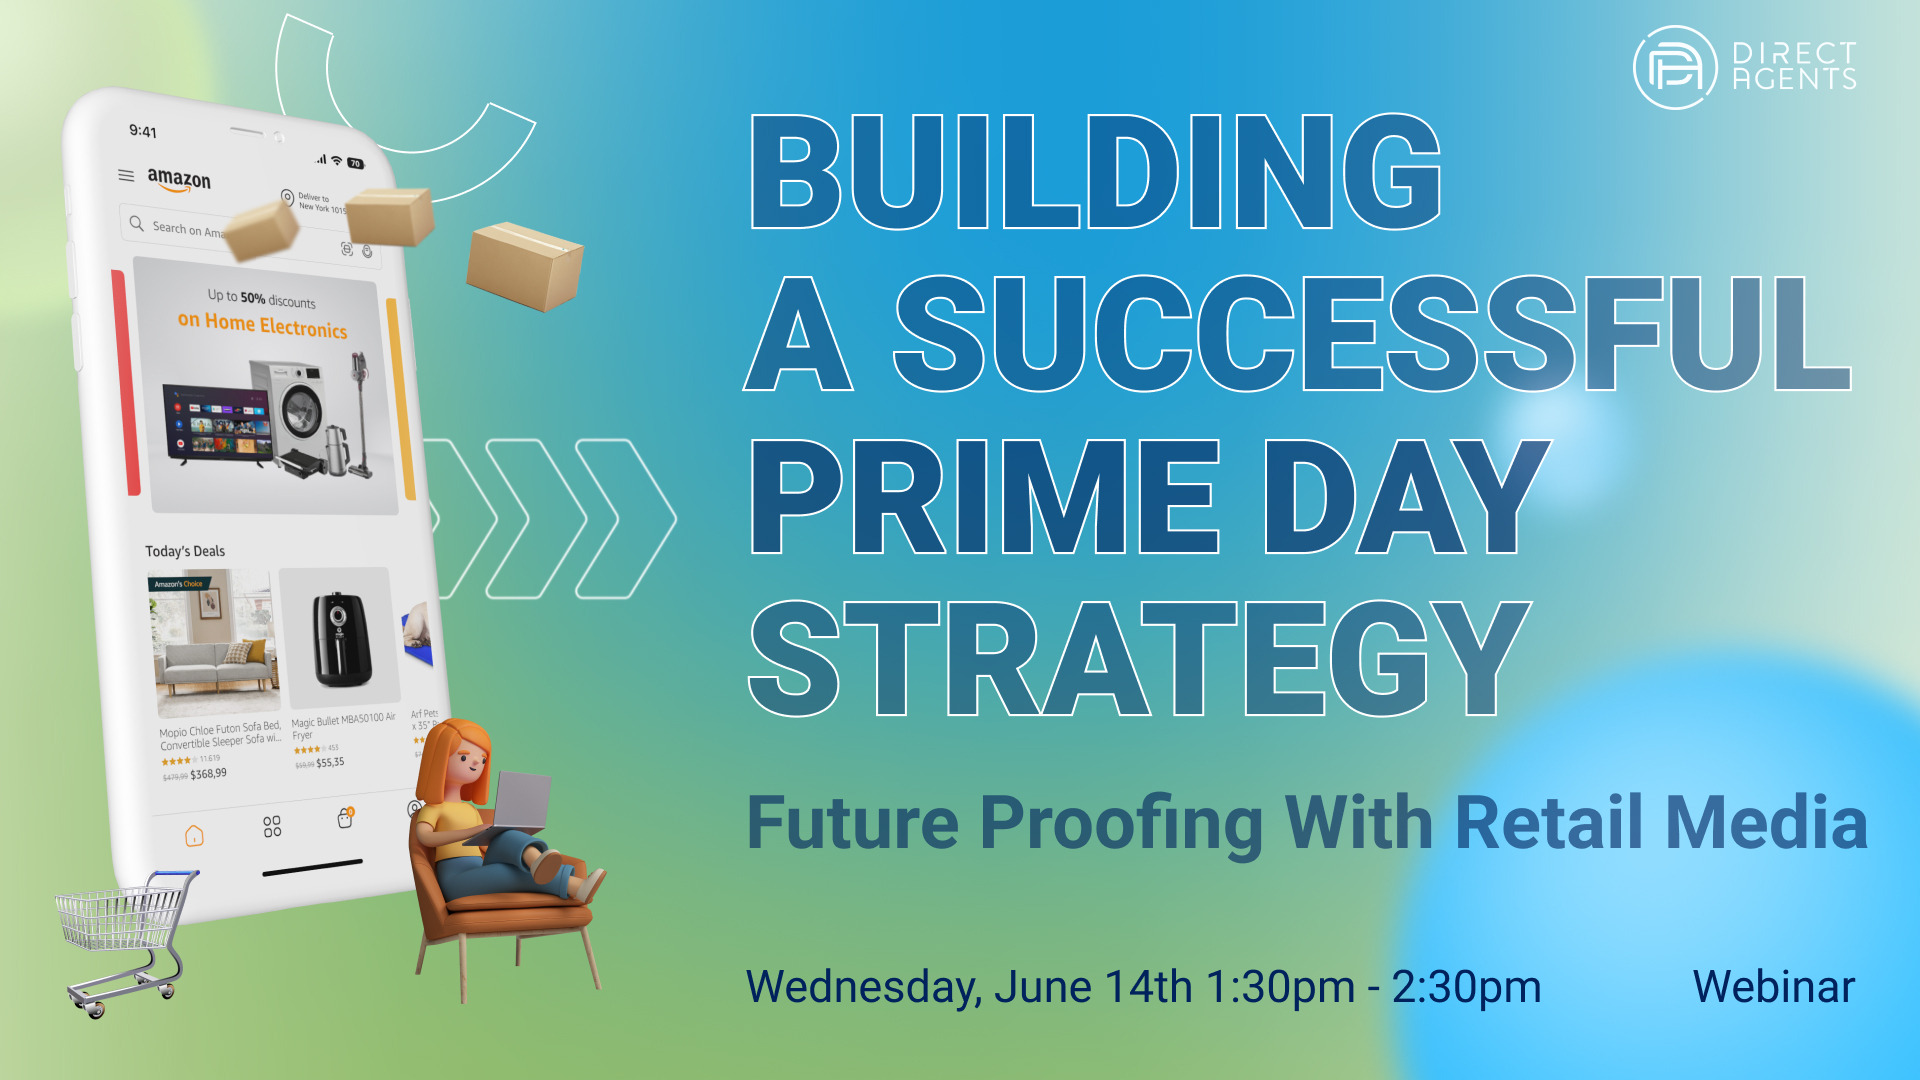 Building A Successful Prime Day Strategy: Future Proofing with Retail Media